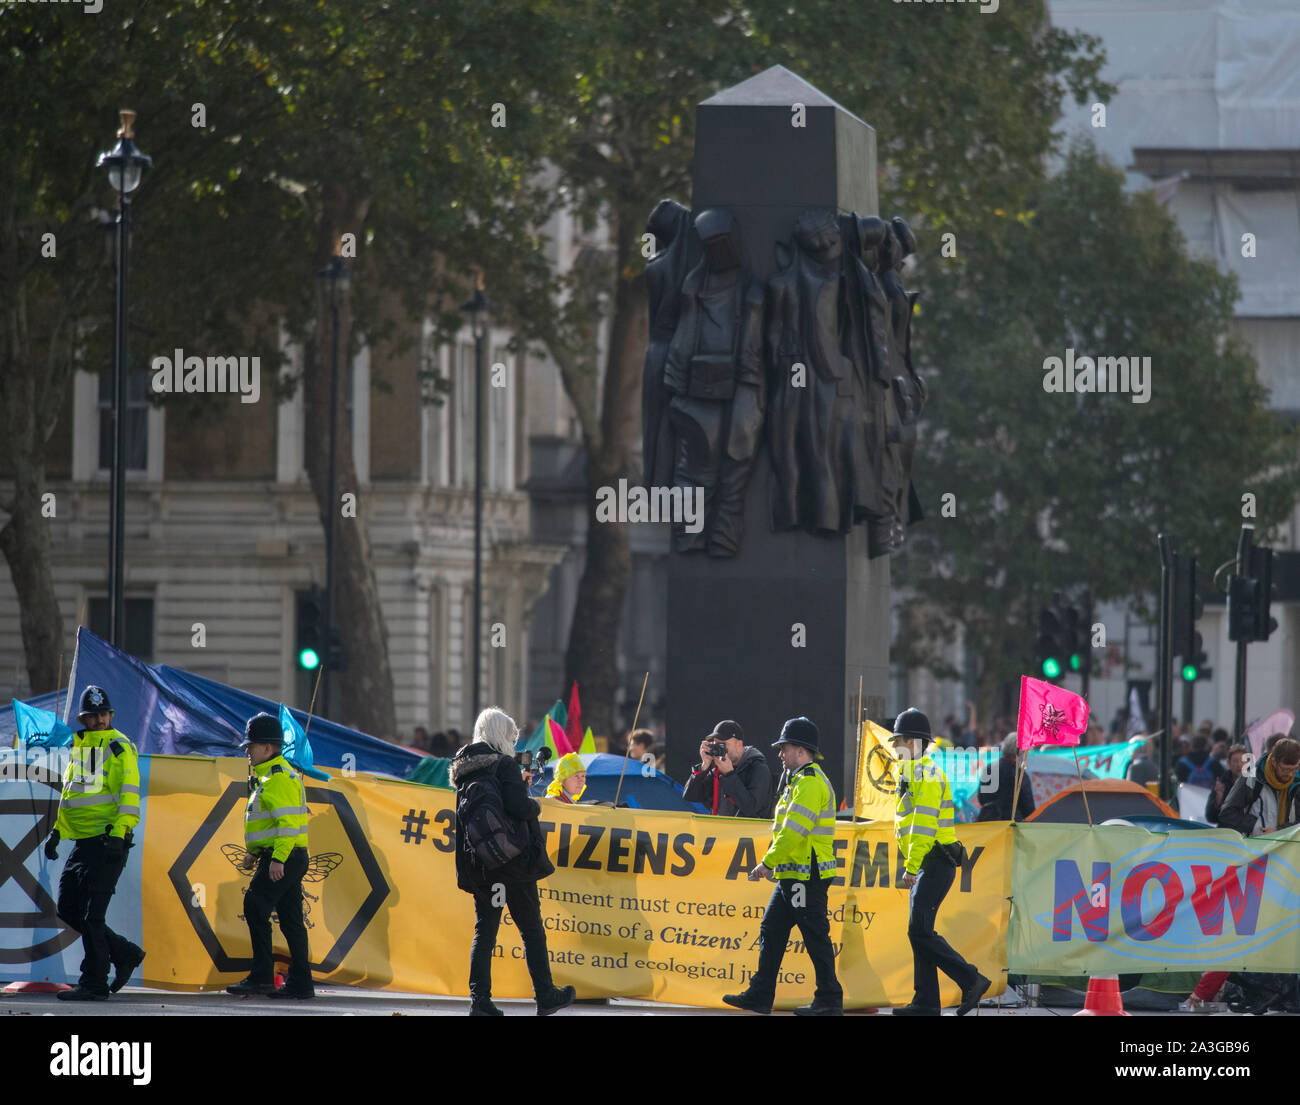 Westminster, London, UK. 8th October 2019. Extinction Rebellion activists block roads around Westminster in a second day of climate-change demonstrations. Whitehall is closed as demonstrators assemble close to the Downing Street entrance. Credit: Malcolm Park/Alamy Live News. Stock Photo